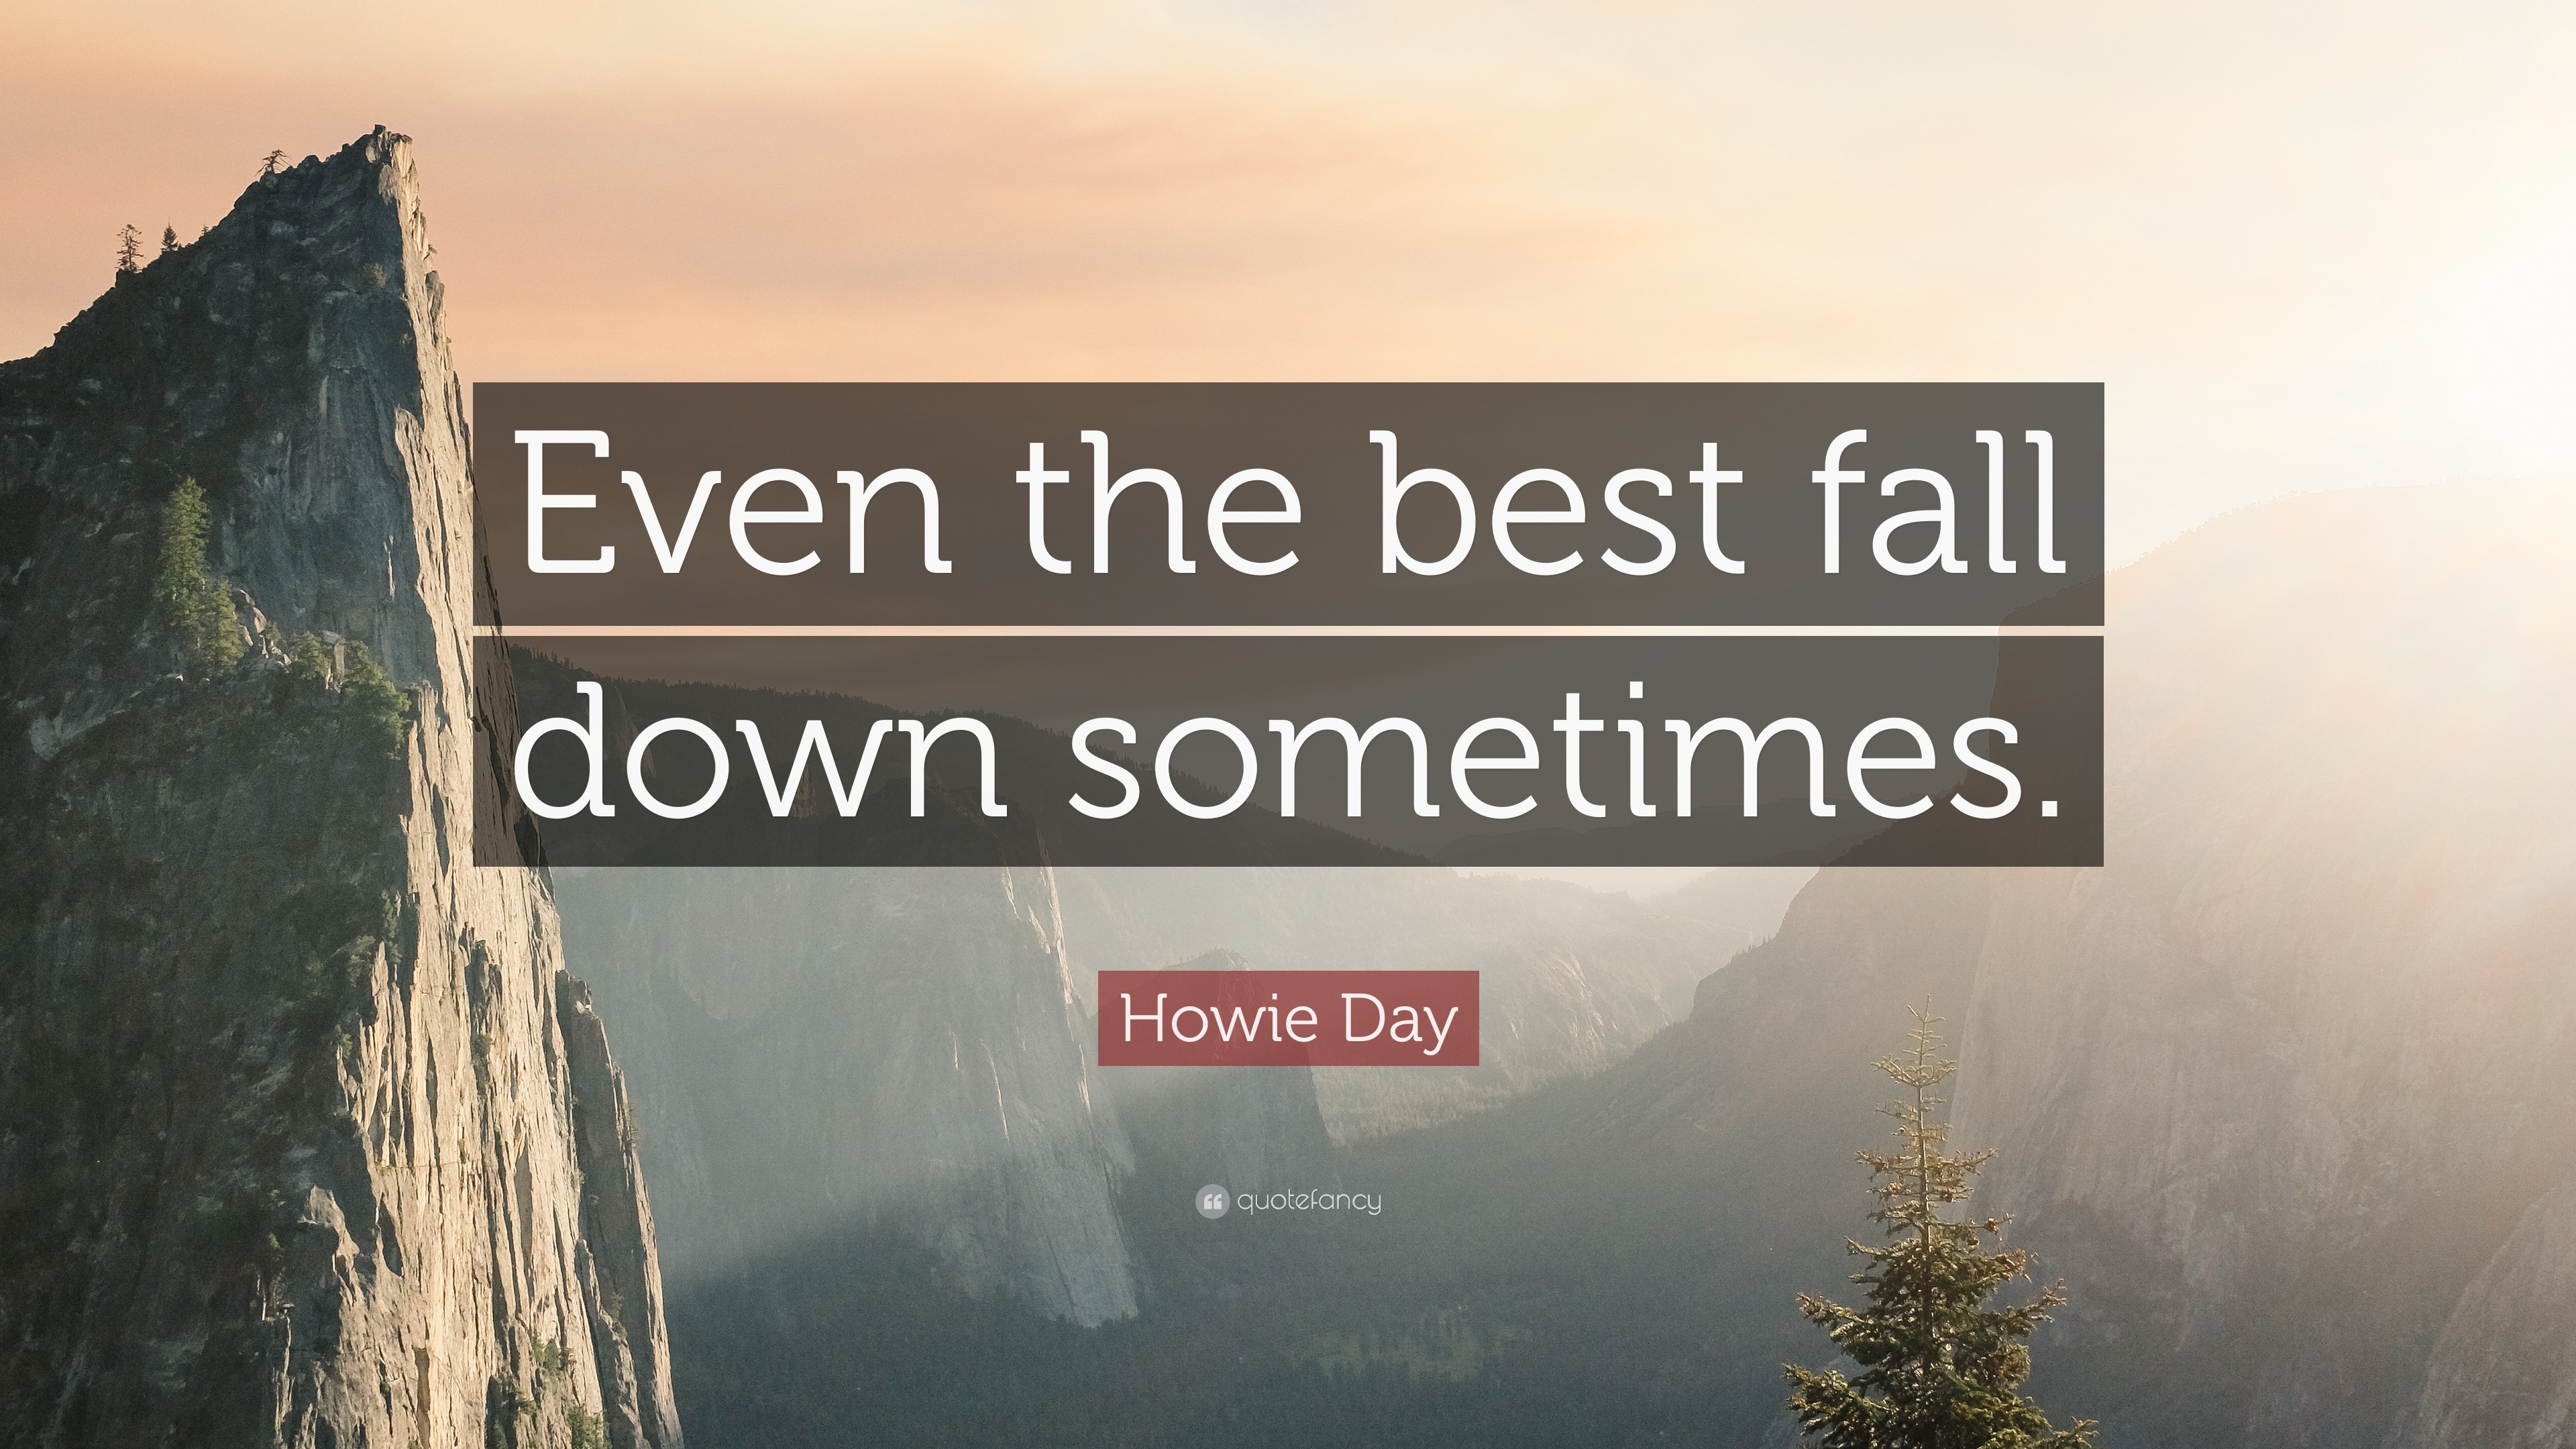 Howie Day Quote: “Even the best fall down sometimes.”